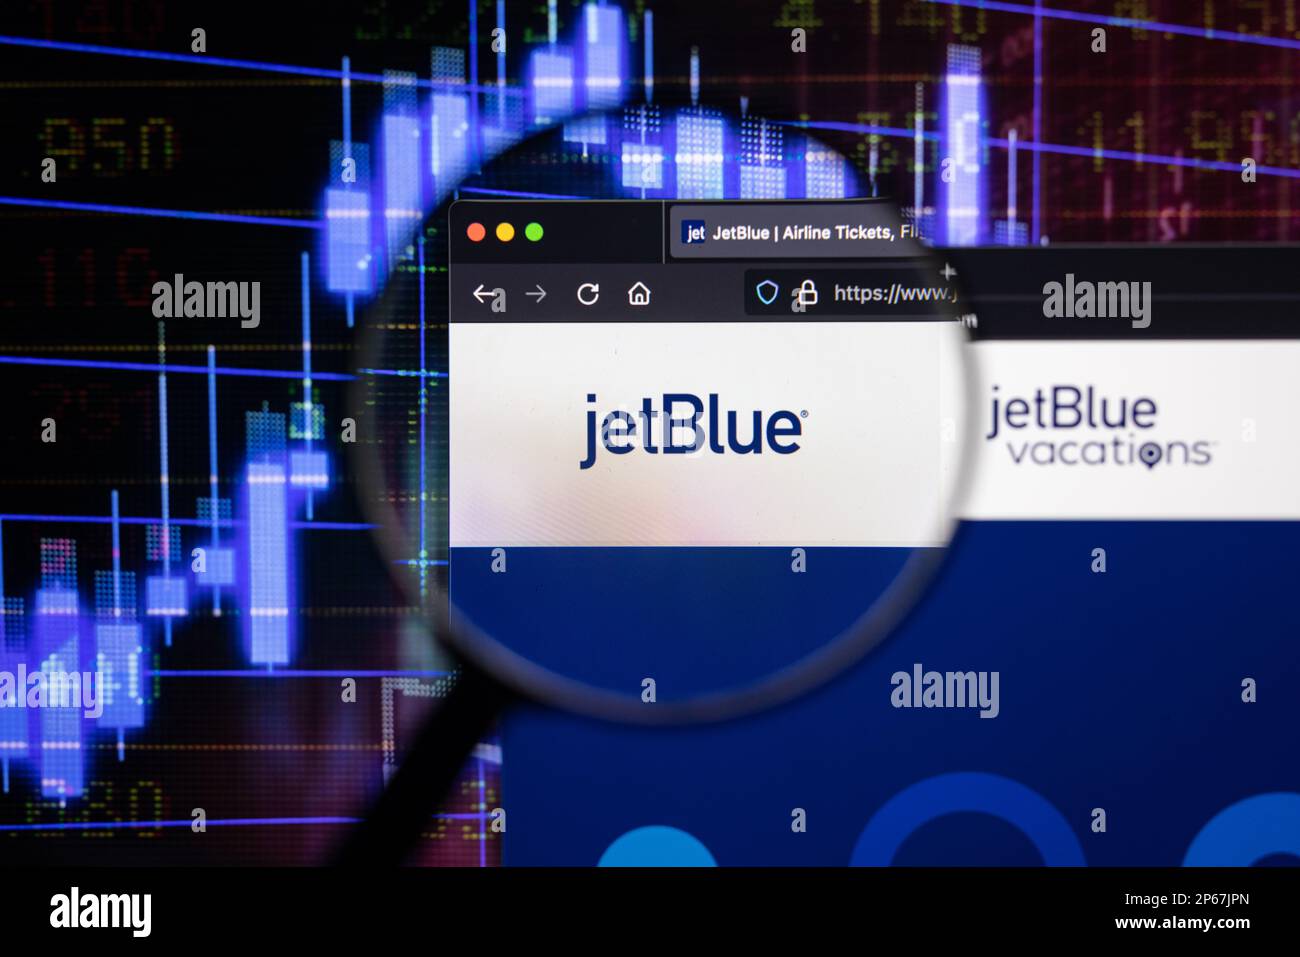 Jetblue company logo on a website with blurry stock market developments in the background, seen on a computer screen through a magnifying glass Stock Photo